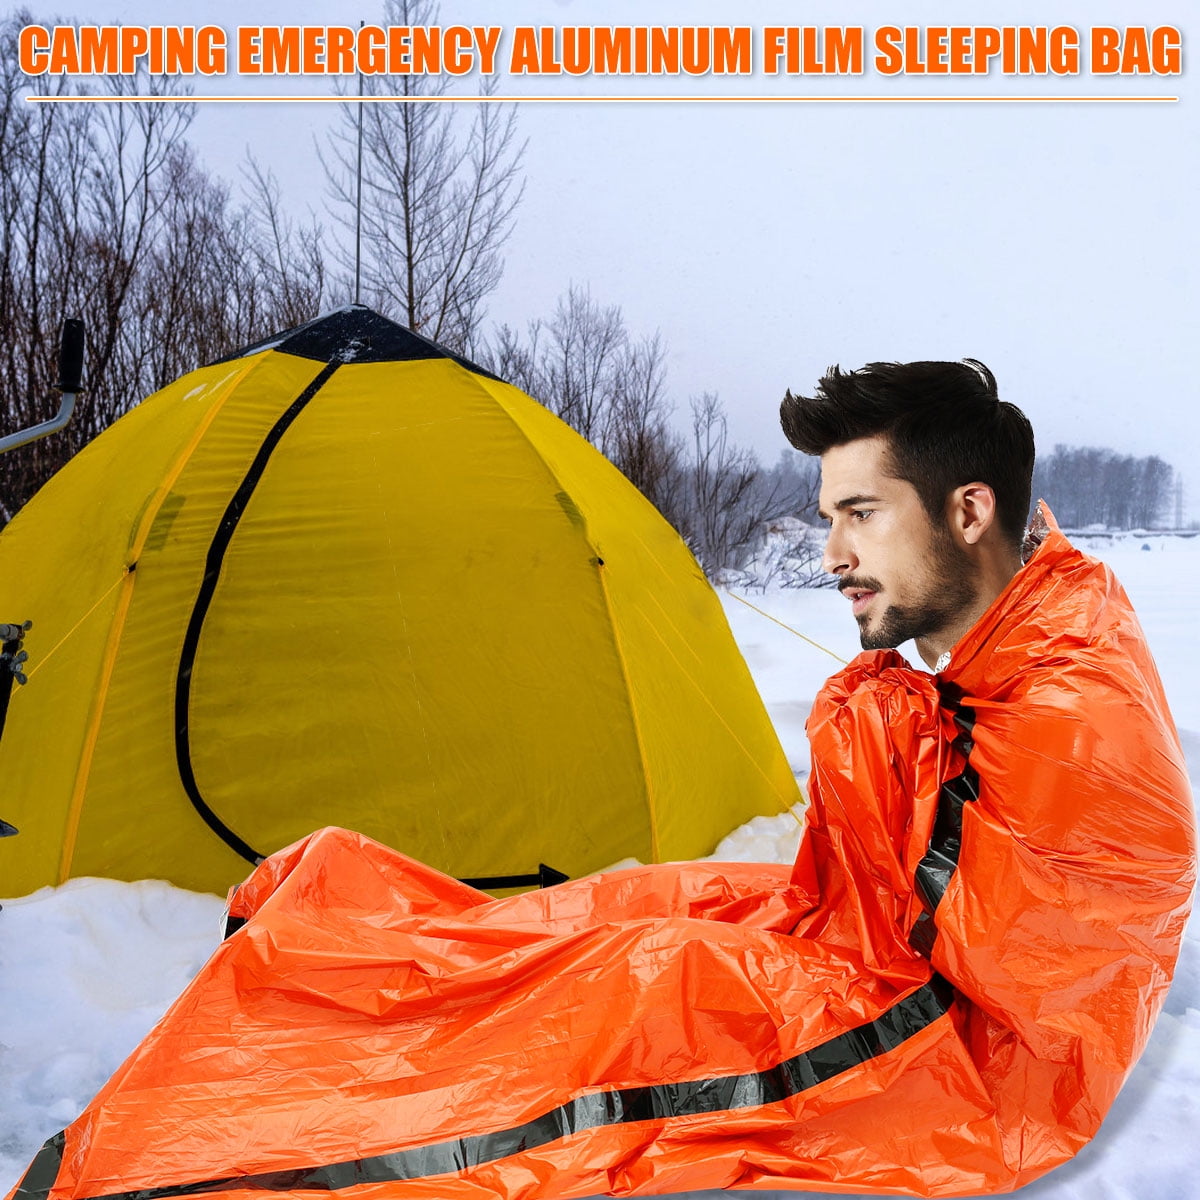 Hiking Easy Discovered&Rescued Suits for Camping Foldable&Reusable Thermal PE Traveling Climbing AOTU Emergency Blanket/Bag/Tent of Emergency Kit Emergency 